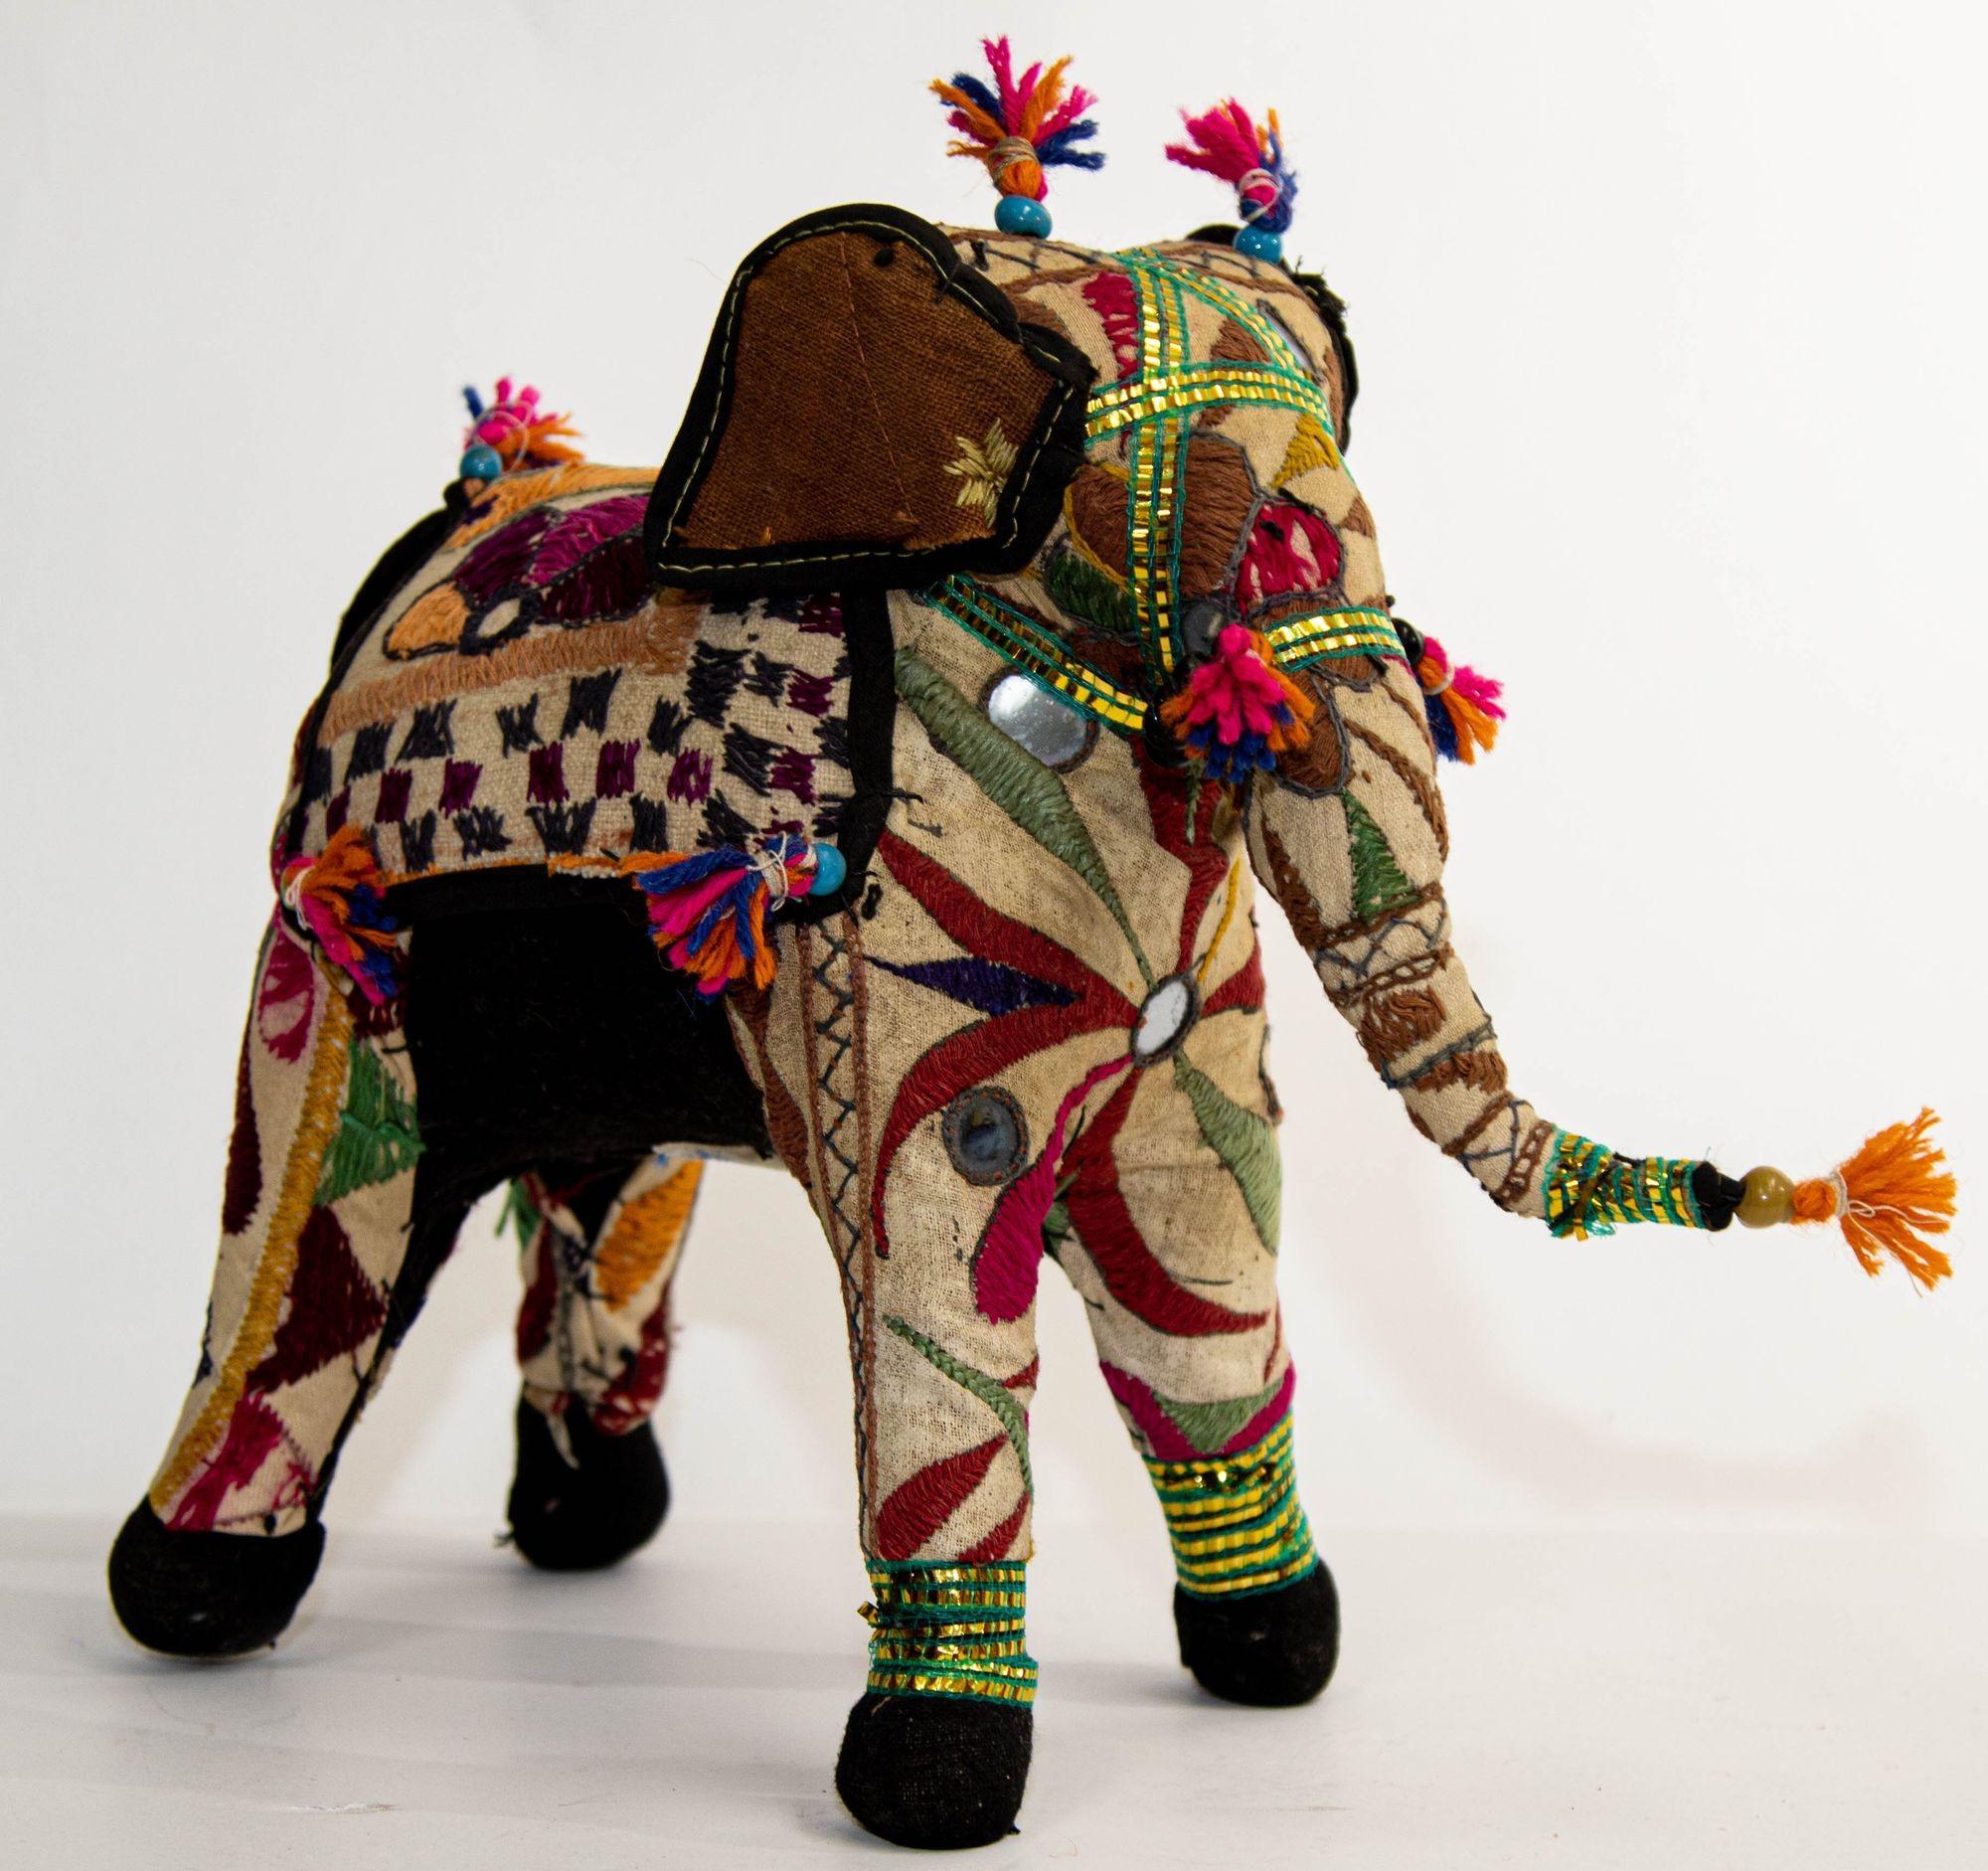 Vintage Raj Hand-Crafted Stuffed Cotton Embroidered Elephant, India, 1950 For Sale 7